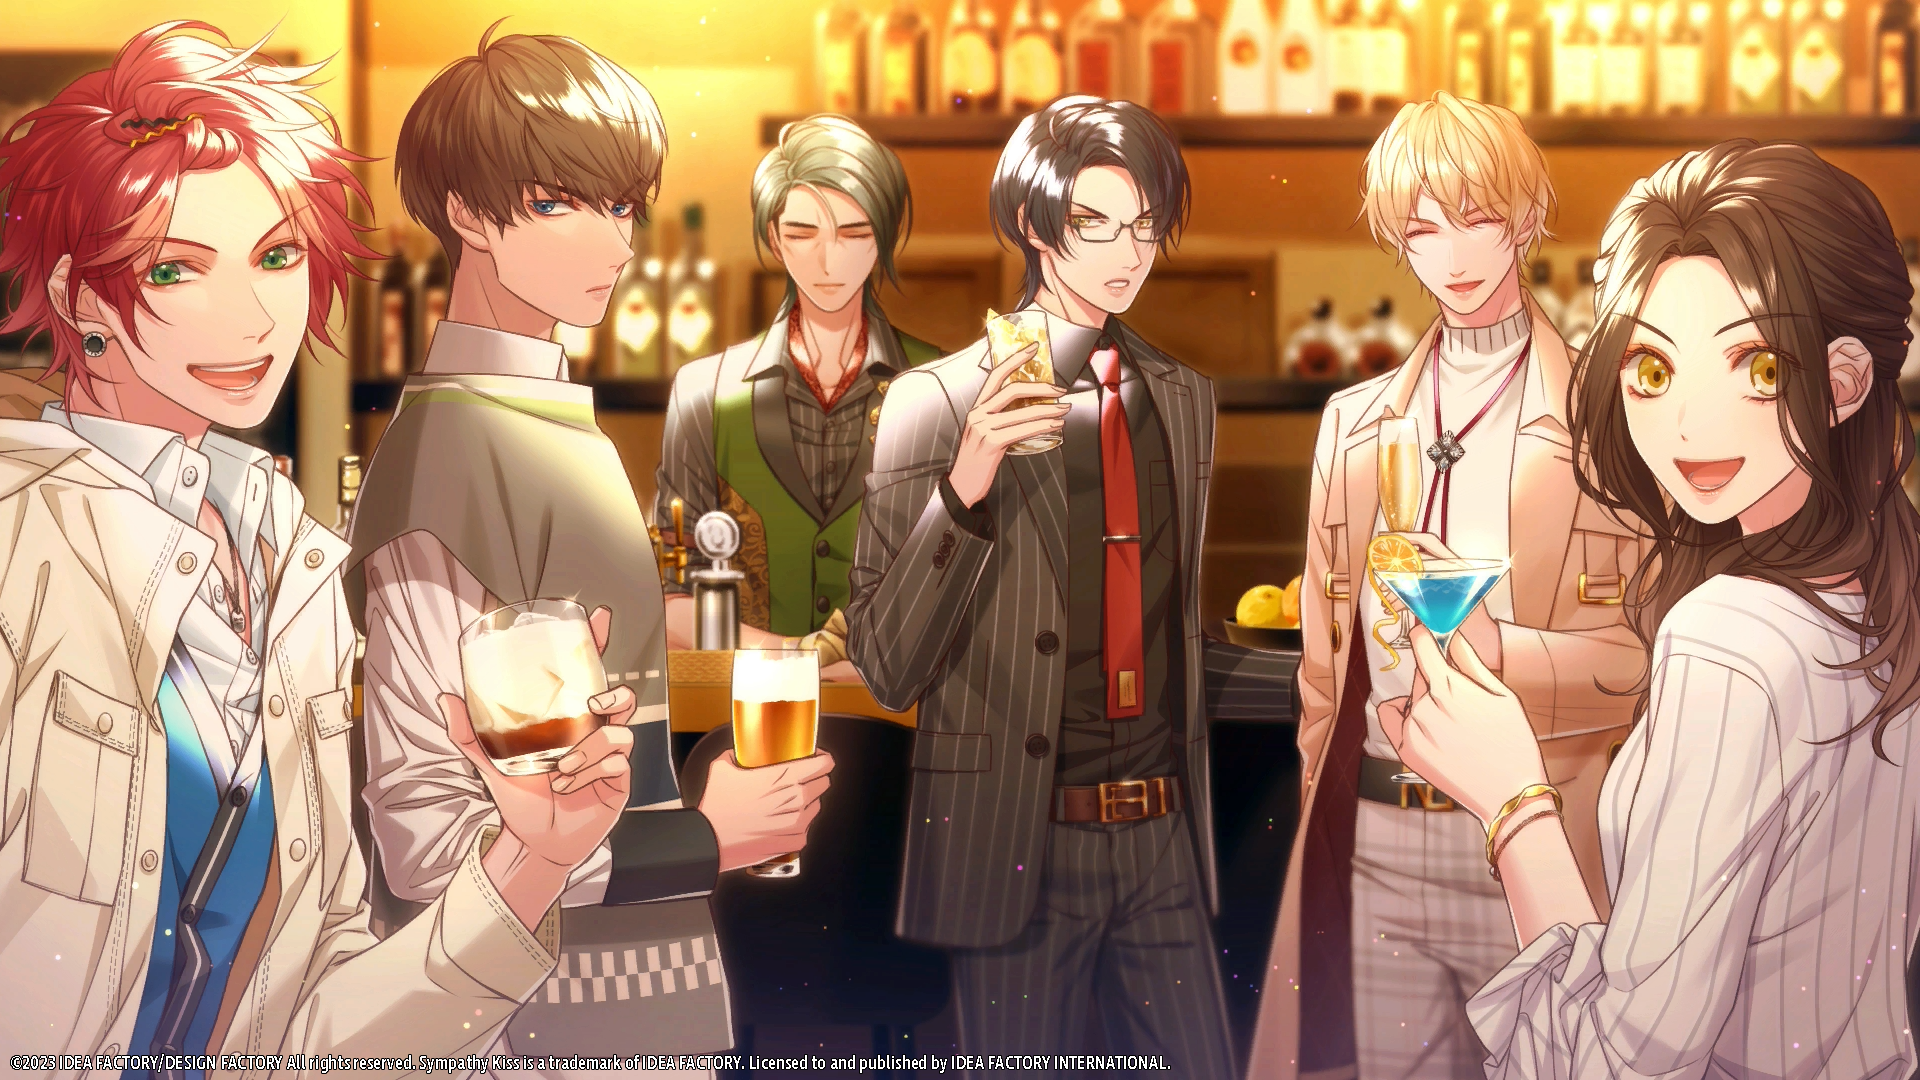 A screenshot from Sympathy Kiss. Five men and one woman stand at a bar, each with a different drink in hand.